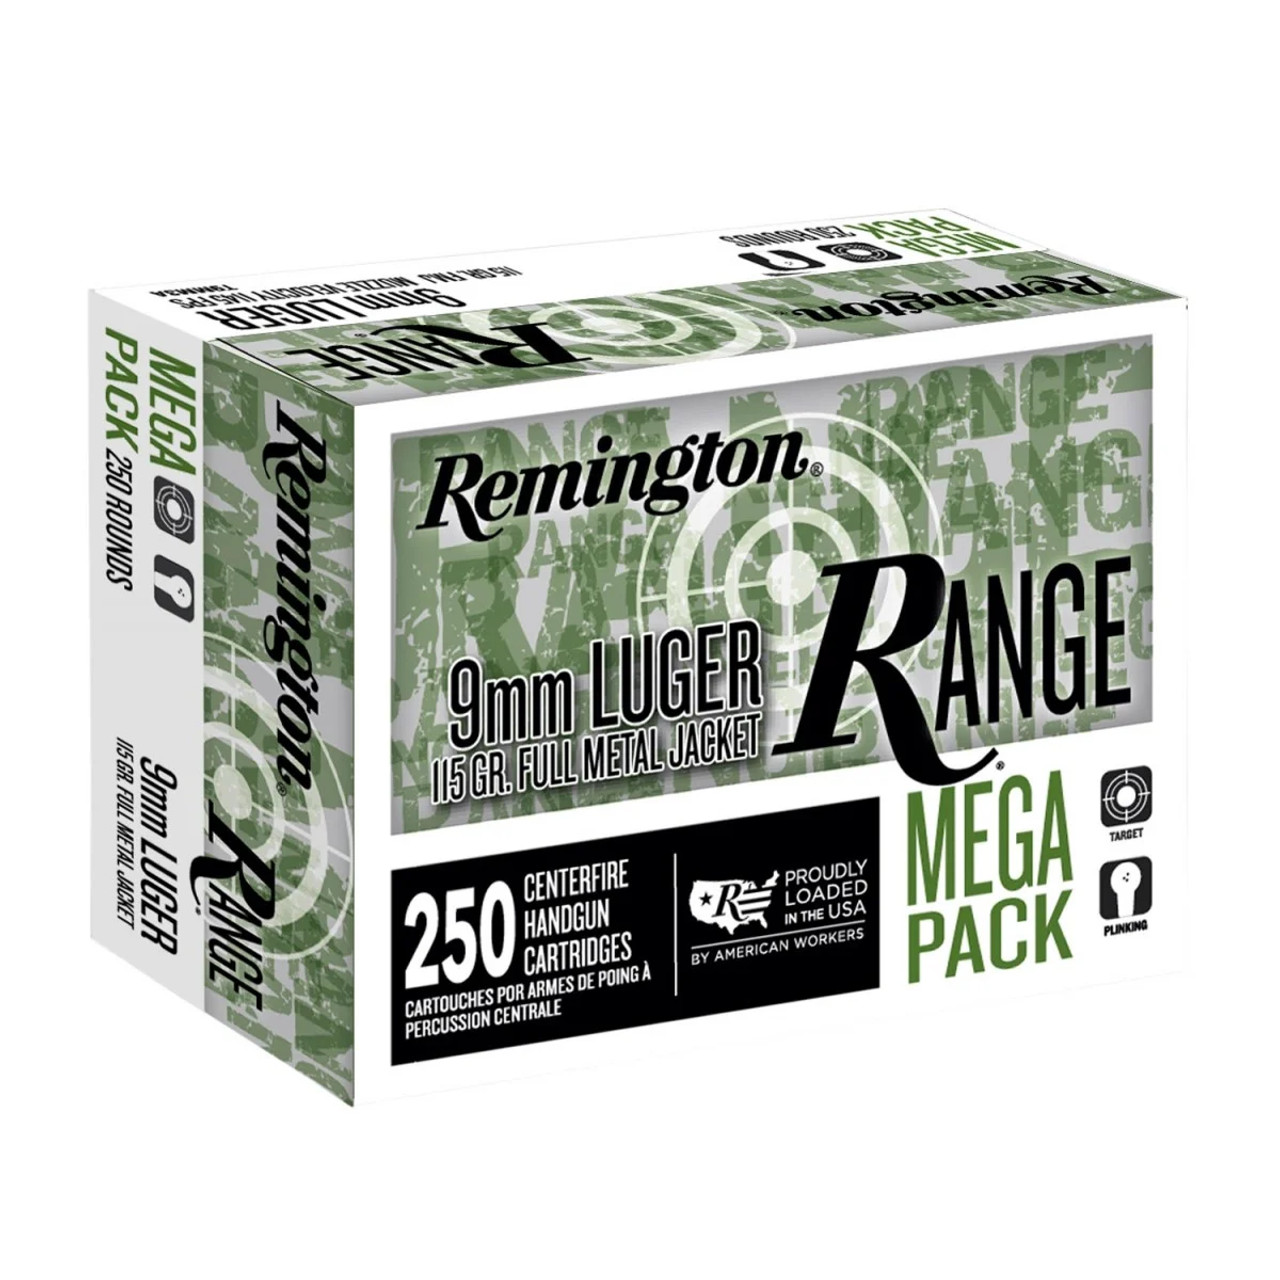 Remington 9mm 115gr FMJ 1000rds
 
Load up and head to the range for an all-day training session or casual target practice with Remington® Range 9mm Luger 115gr FMJ bulk ammo pack. This 1000-round case of range-safe target ammo is engineered to deliver exceptional accuracy and consistent performance at an affordable price. This bulk pistol ammo features quality FMJ bullets, clean-burning Kleanbore™ primers, and temperature-stable propellants for consistent velocities, dependable accuracy, and reliable field performance, packed in reloadable brass casings for consistent and flawless operation in virtually any pistol or PCC chambered in 9mm. 1000rnd Case